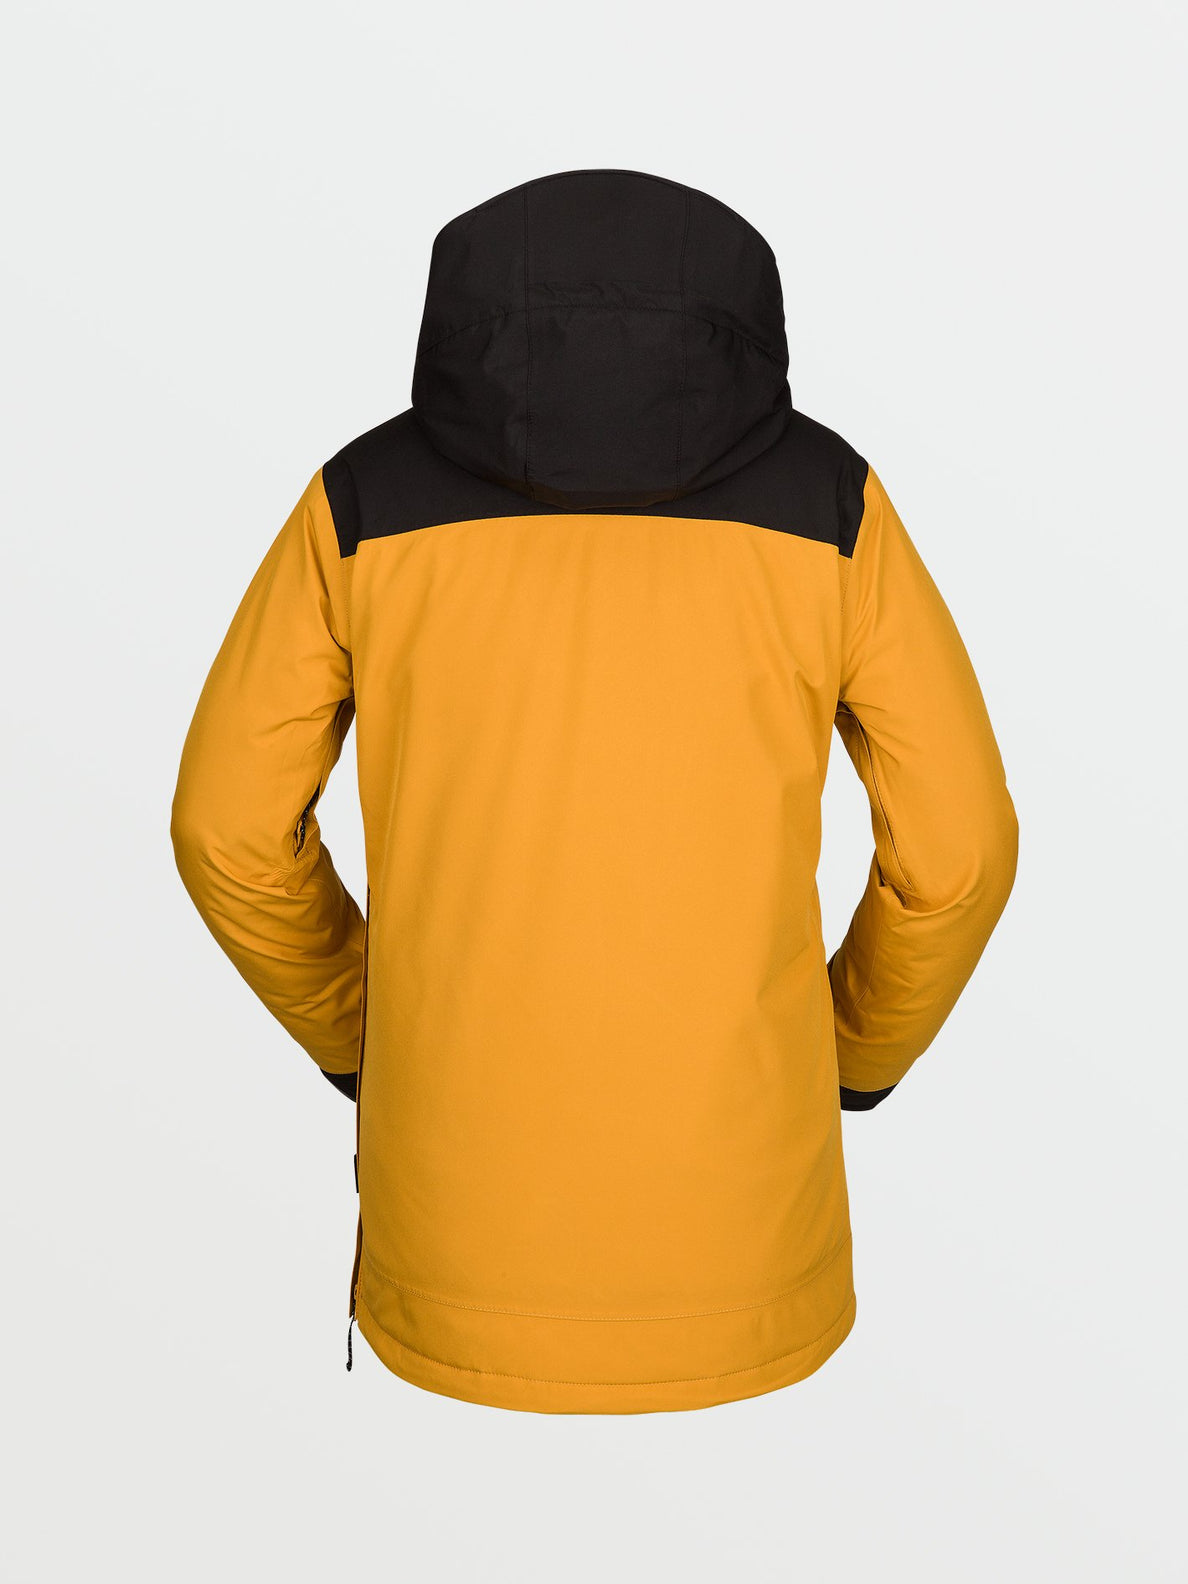 Fern Insulated Gore-Tex Pullover Jacket - RESIN GOLD (H0452204_RSG) [B]